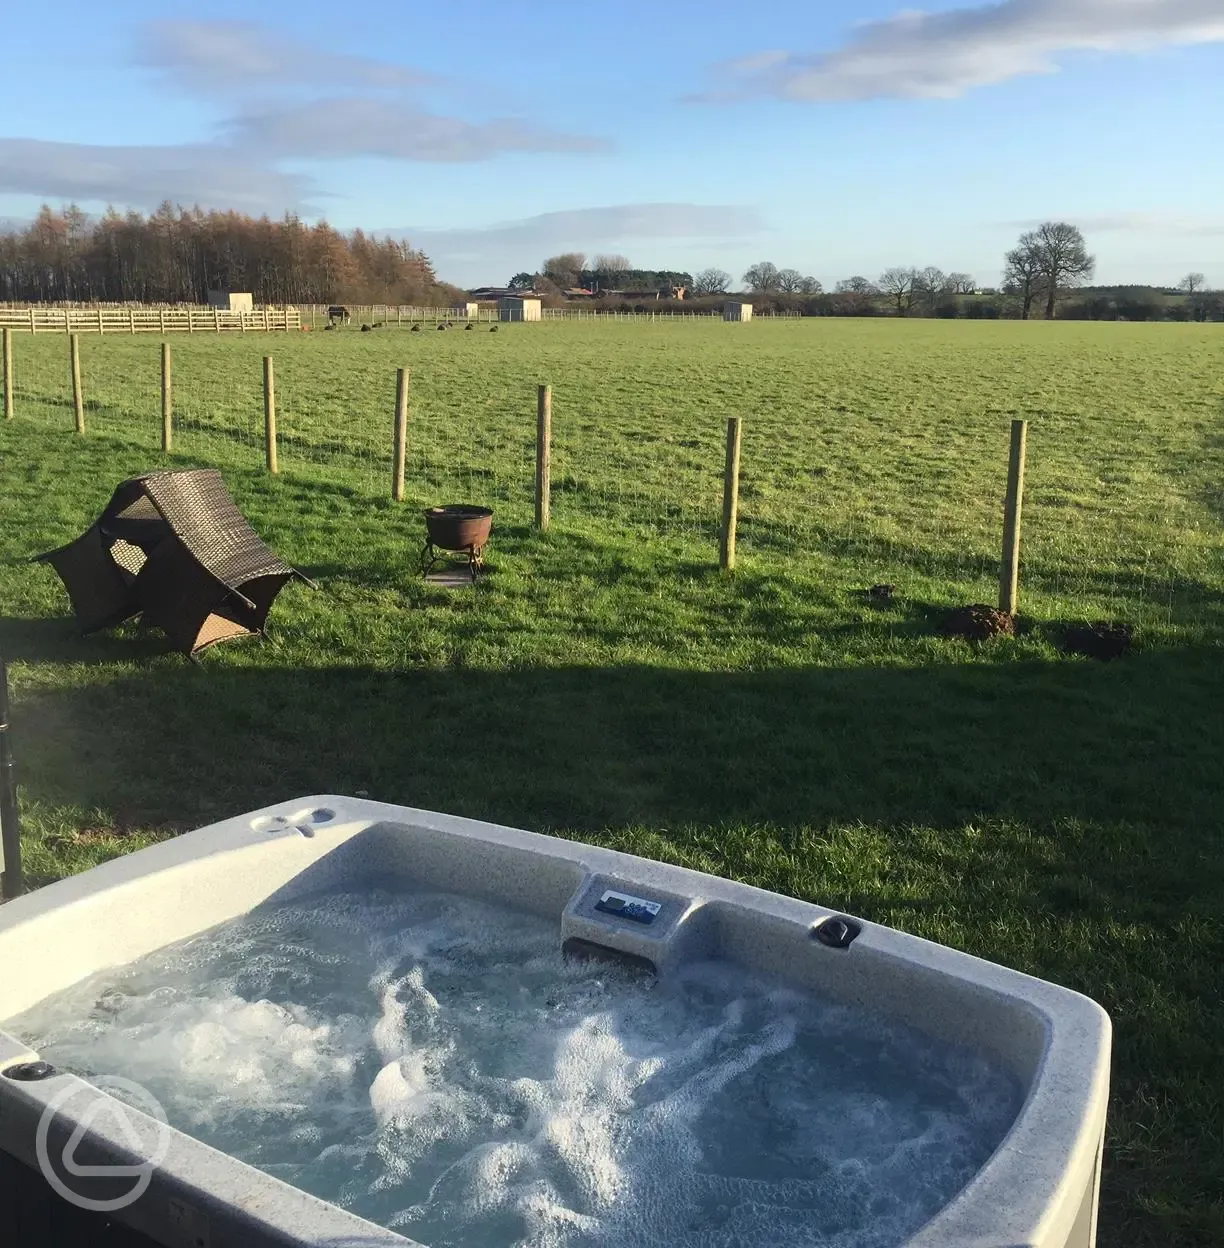 Relax in the hot tub, no maintenance required 